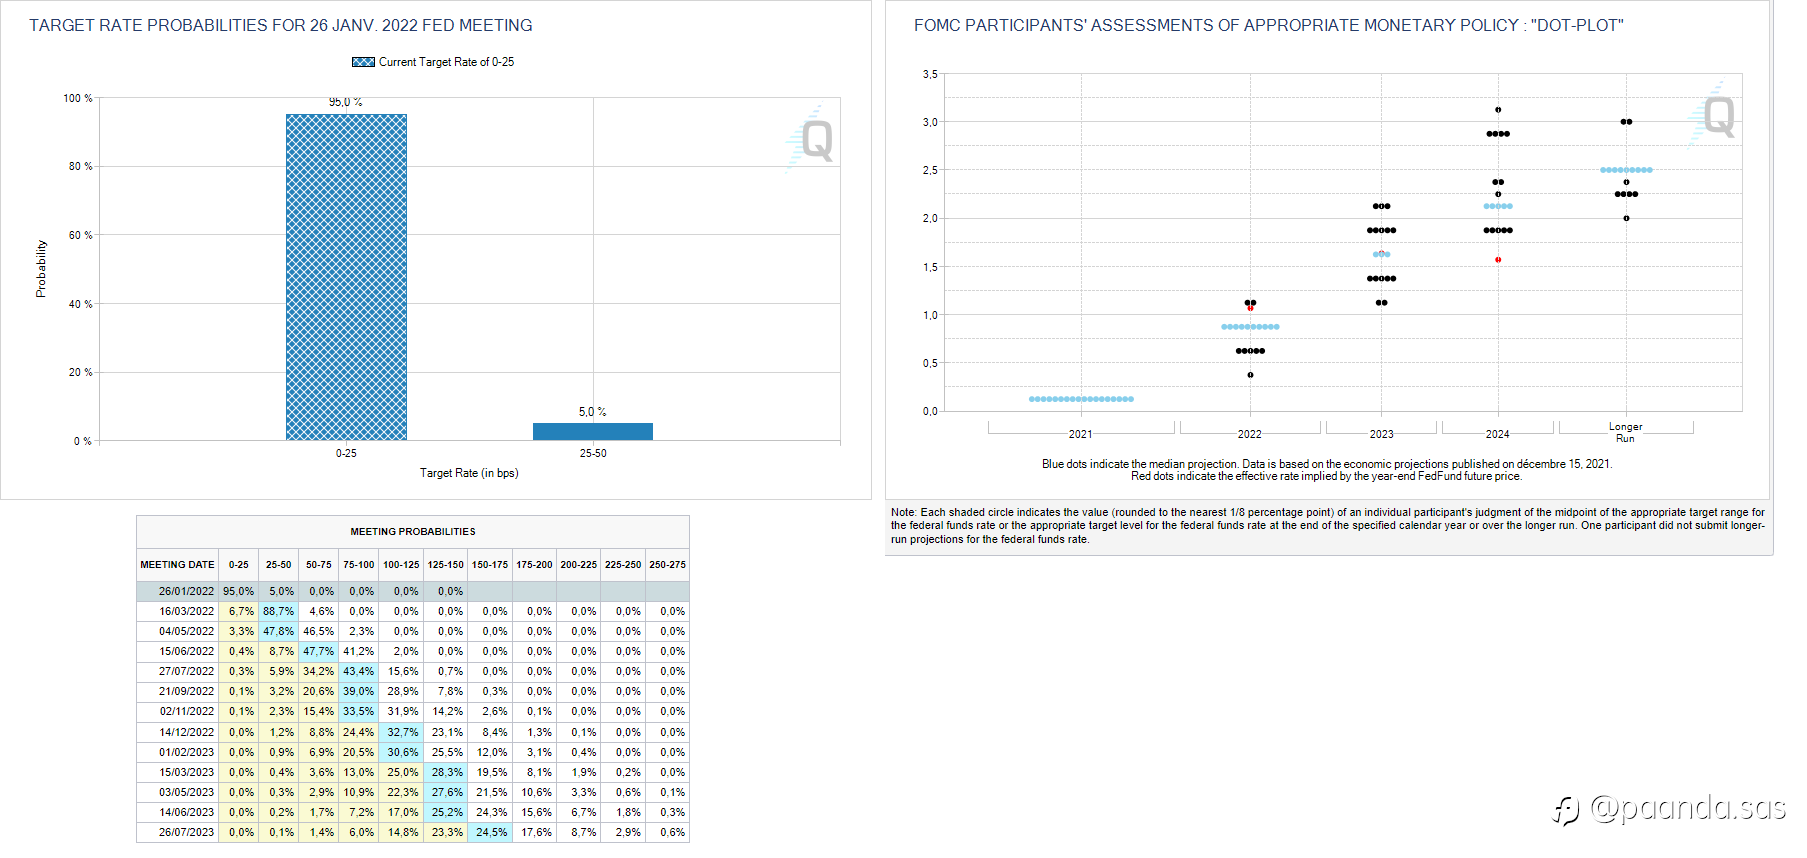 FOMC - Probabilities of a rate hike?